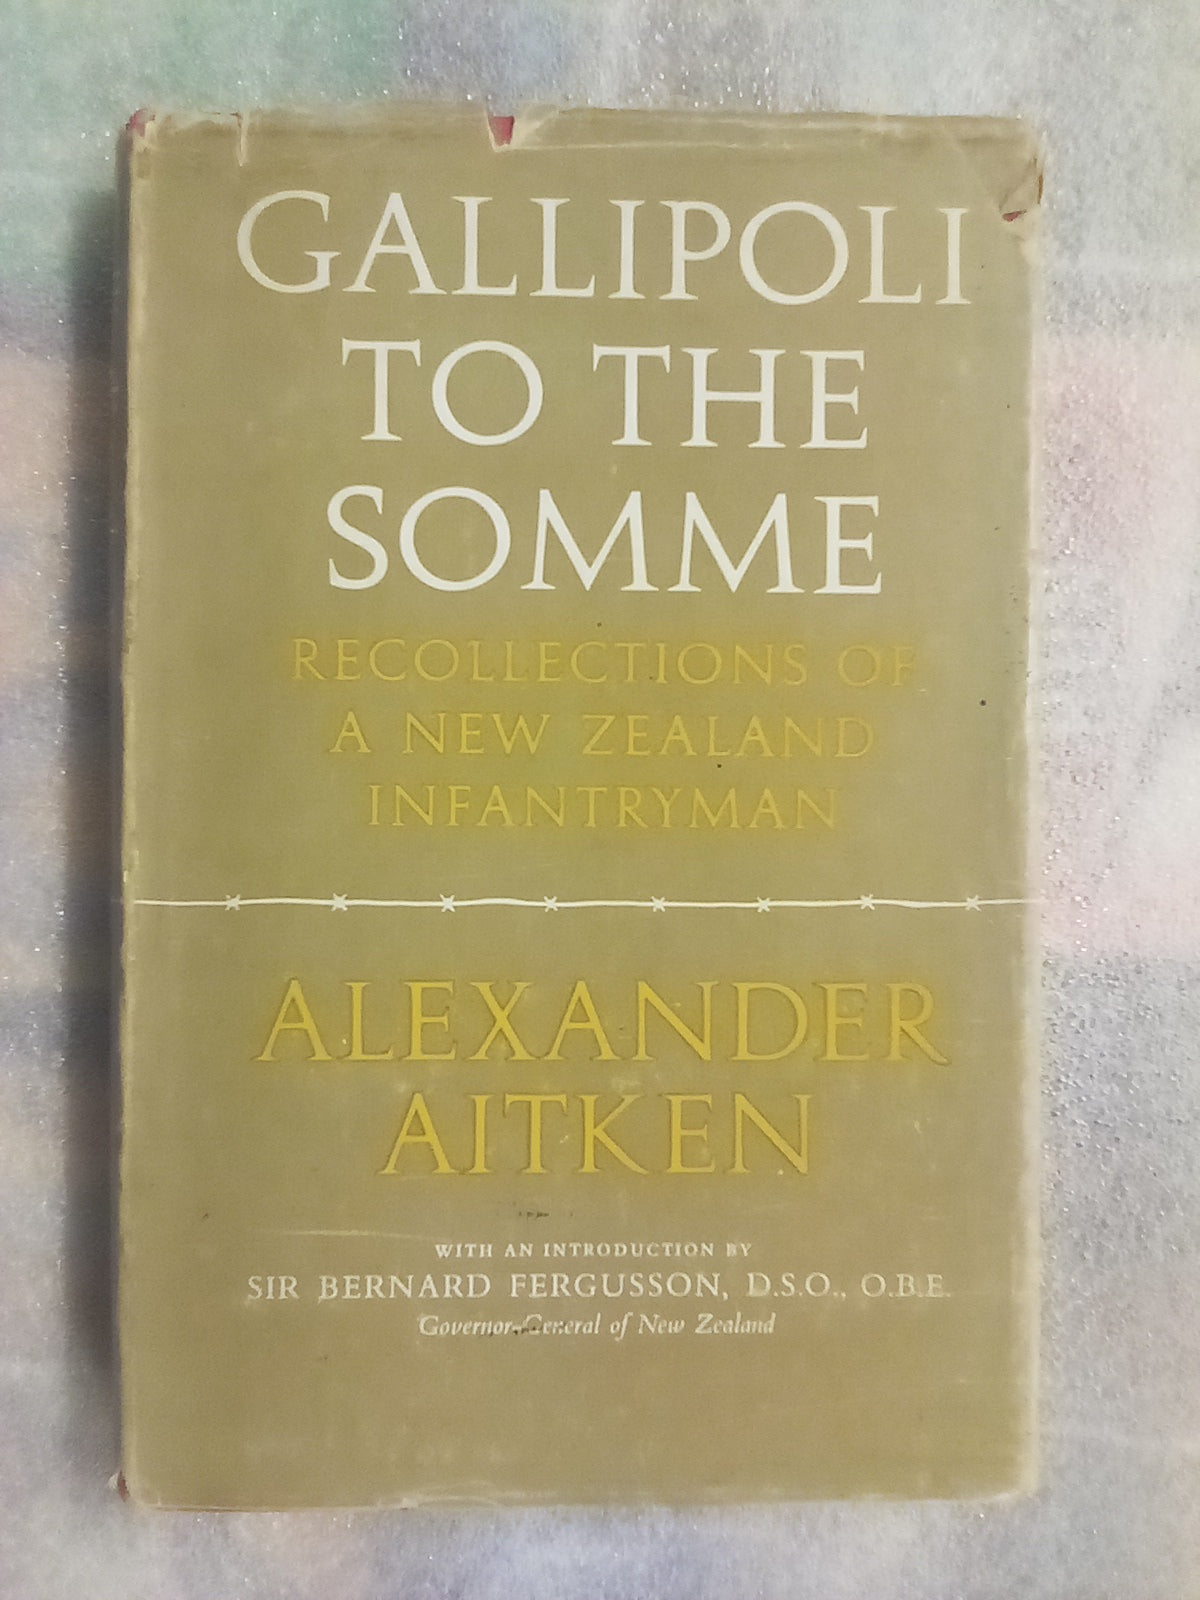 Gallipoli to the Somme - Recollections of a NZ Infantryman (1963)